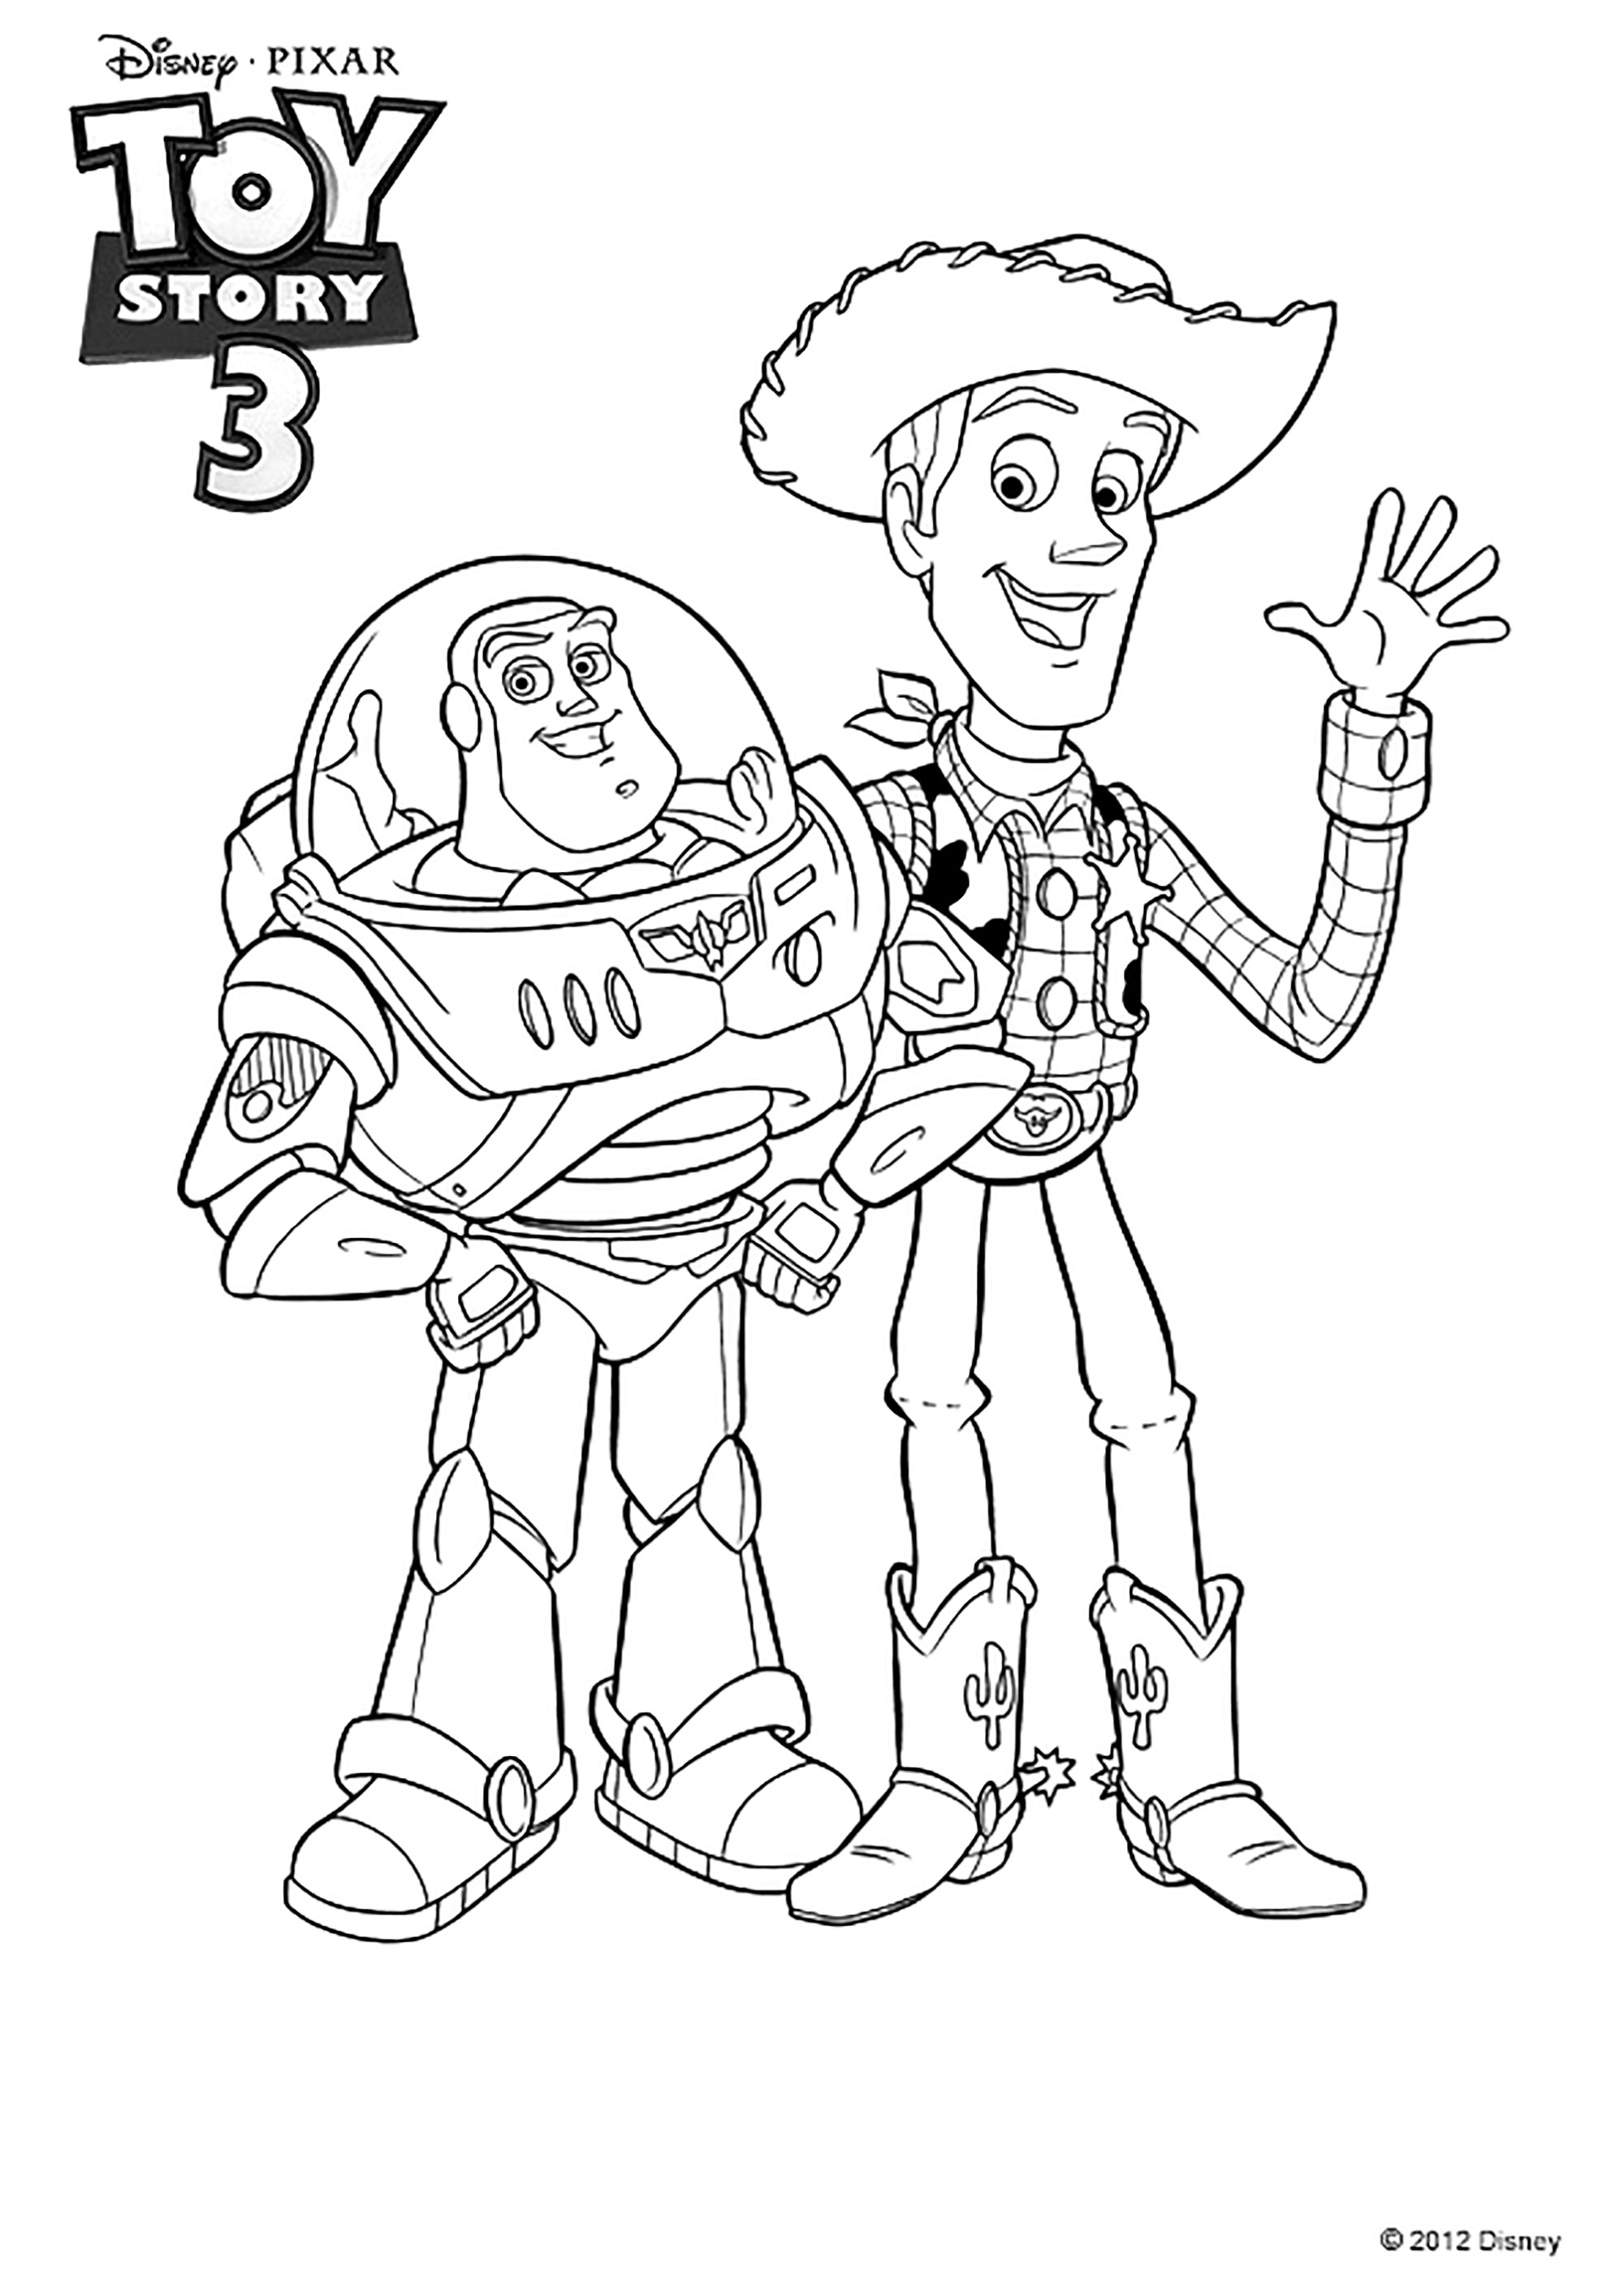 Toy story 3 : Buzz avec Woody - Toy Story 3 Kids Coloring Pages